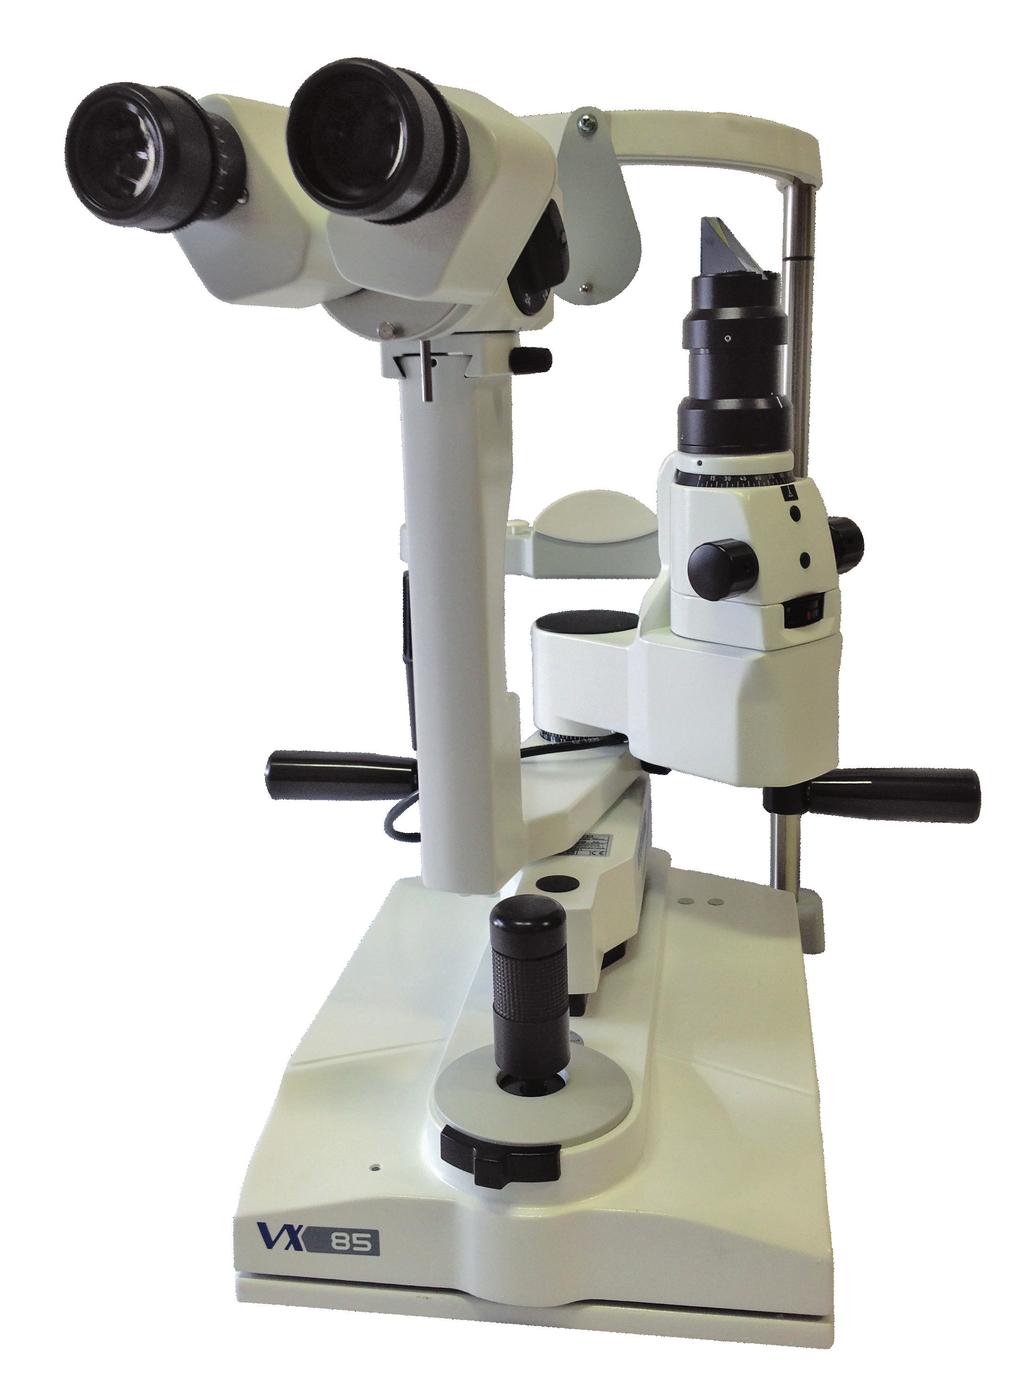 Slit Lamps VX85 Precision at high level Converging 6 - magnifications REF. 8485-0001-0 Converging 6-5 magnifications REF. 8485-0001-05 Electric height adjustment Parallel 6 - magnifications REF.